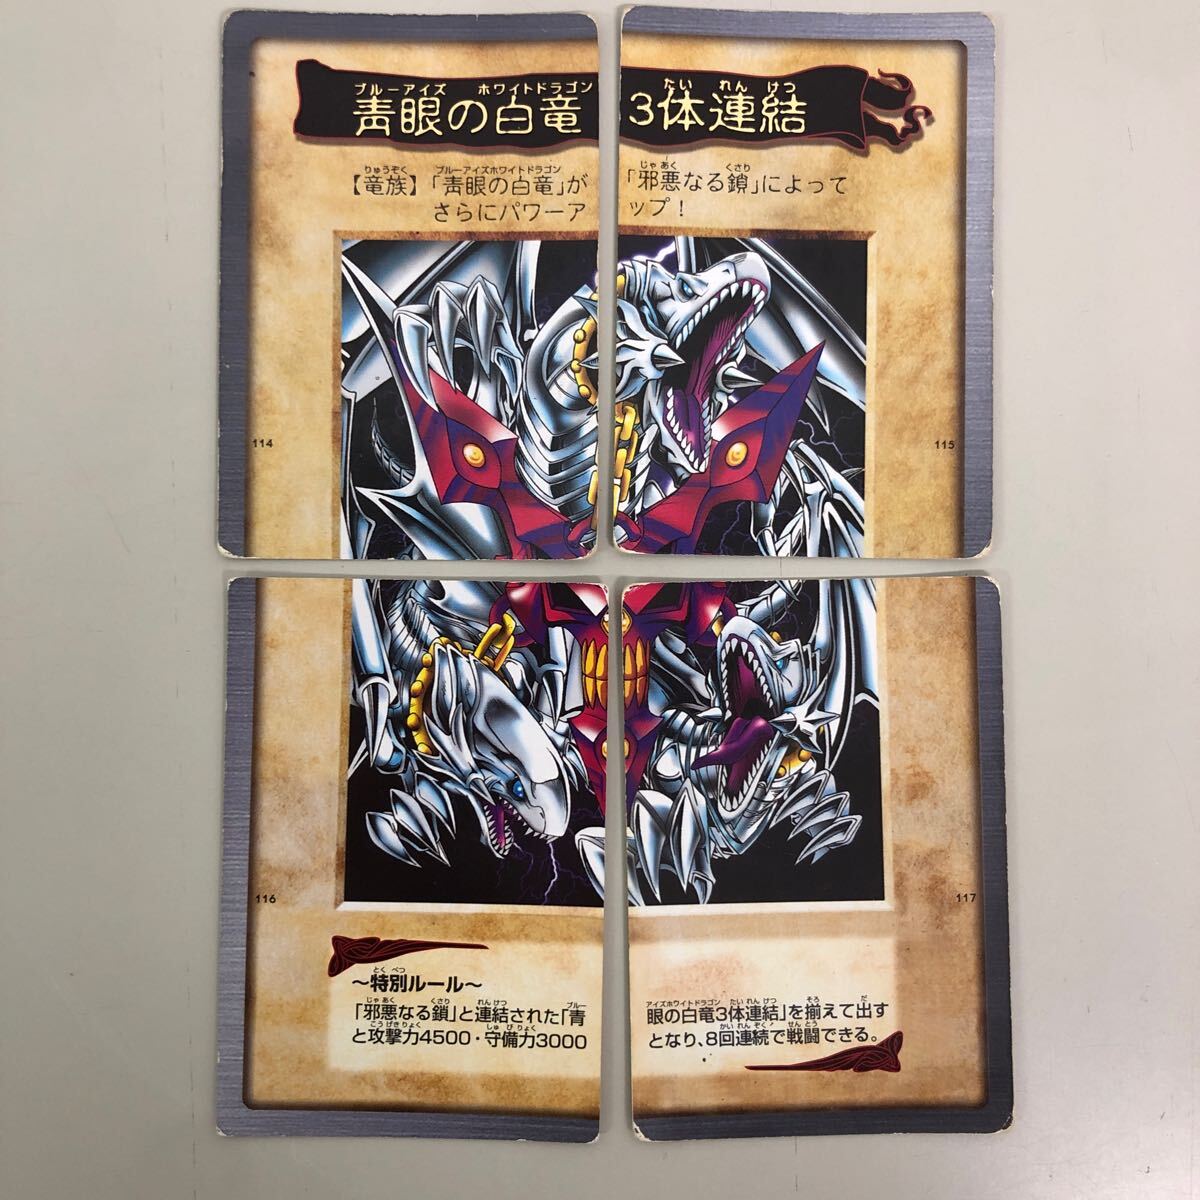  Bandai version Yugioh approximately 450 sheets set sale almost normal 